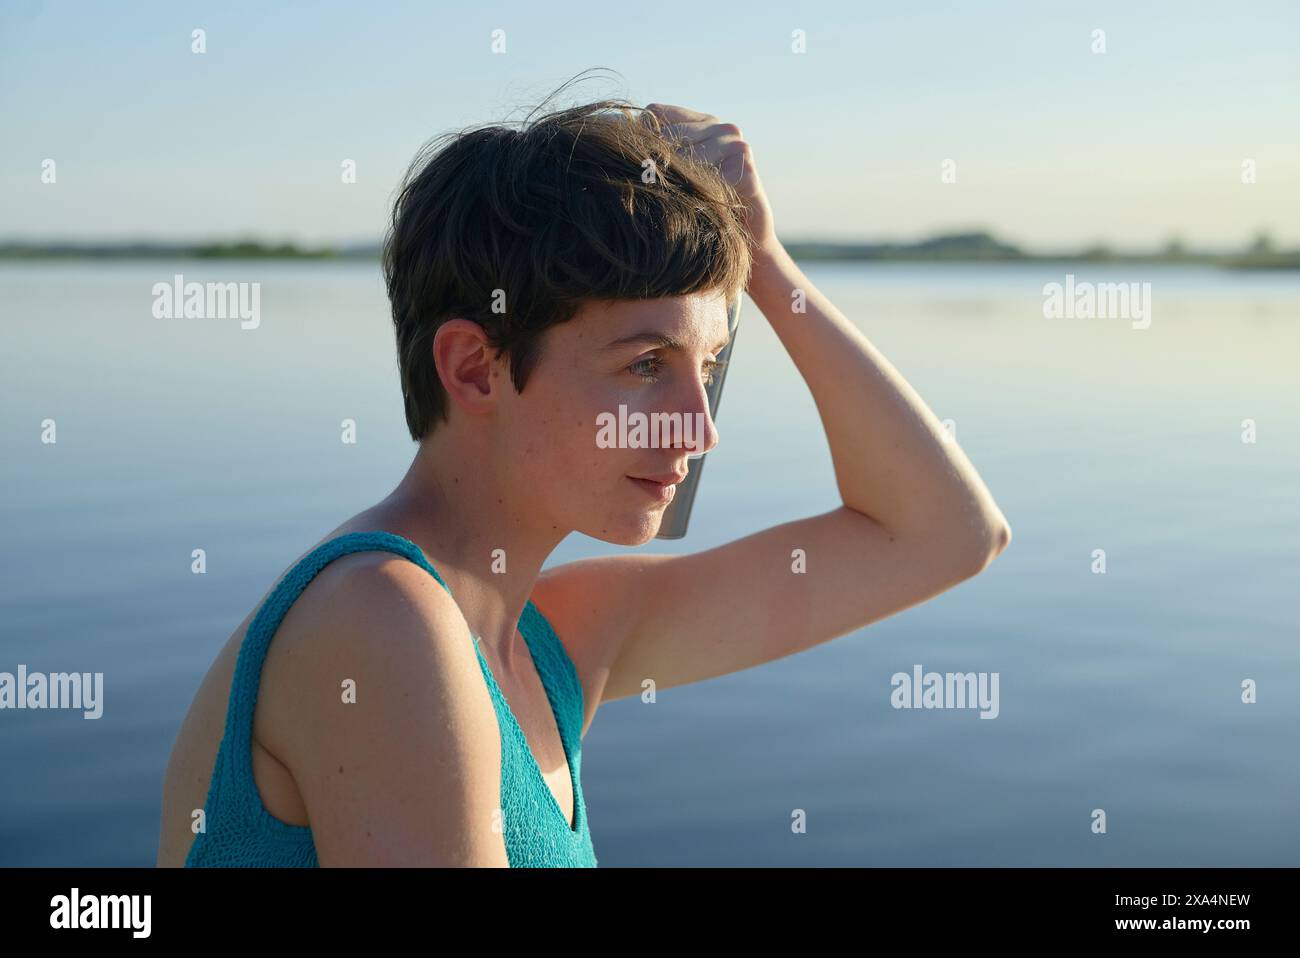 A young woman with short hair stands by a body of water at dusk, lifting their hand to their head, with a thoughtful expression and the horizon in the background. Stock Photo